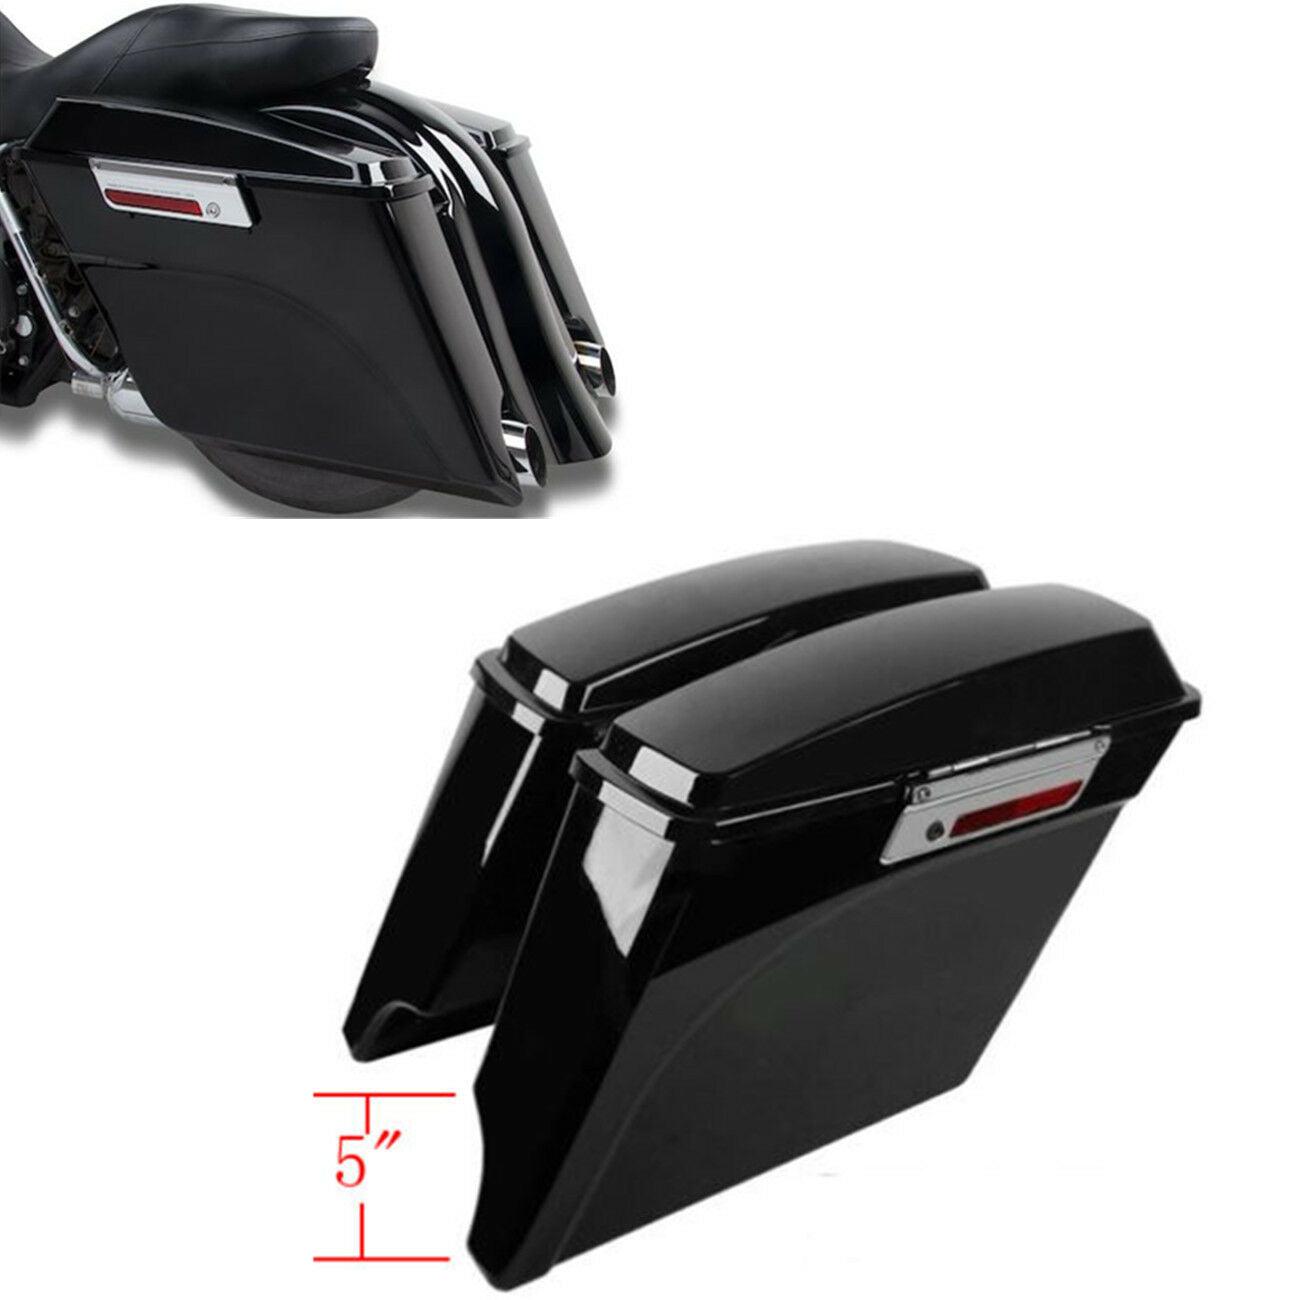 5" Stretched Extended Saddlebags Bag Fit For Harley Touring Electra Glide 93-13 - Moto Life Products